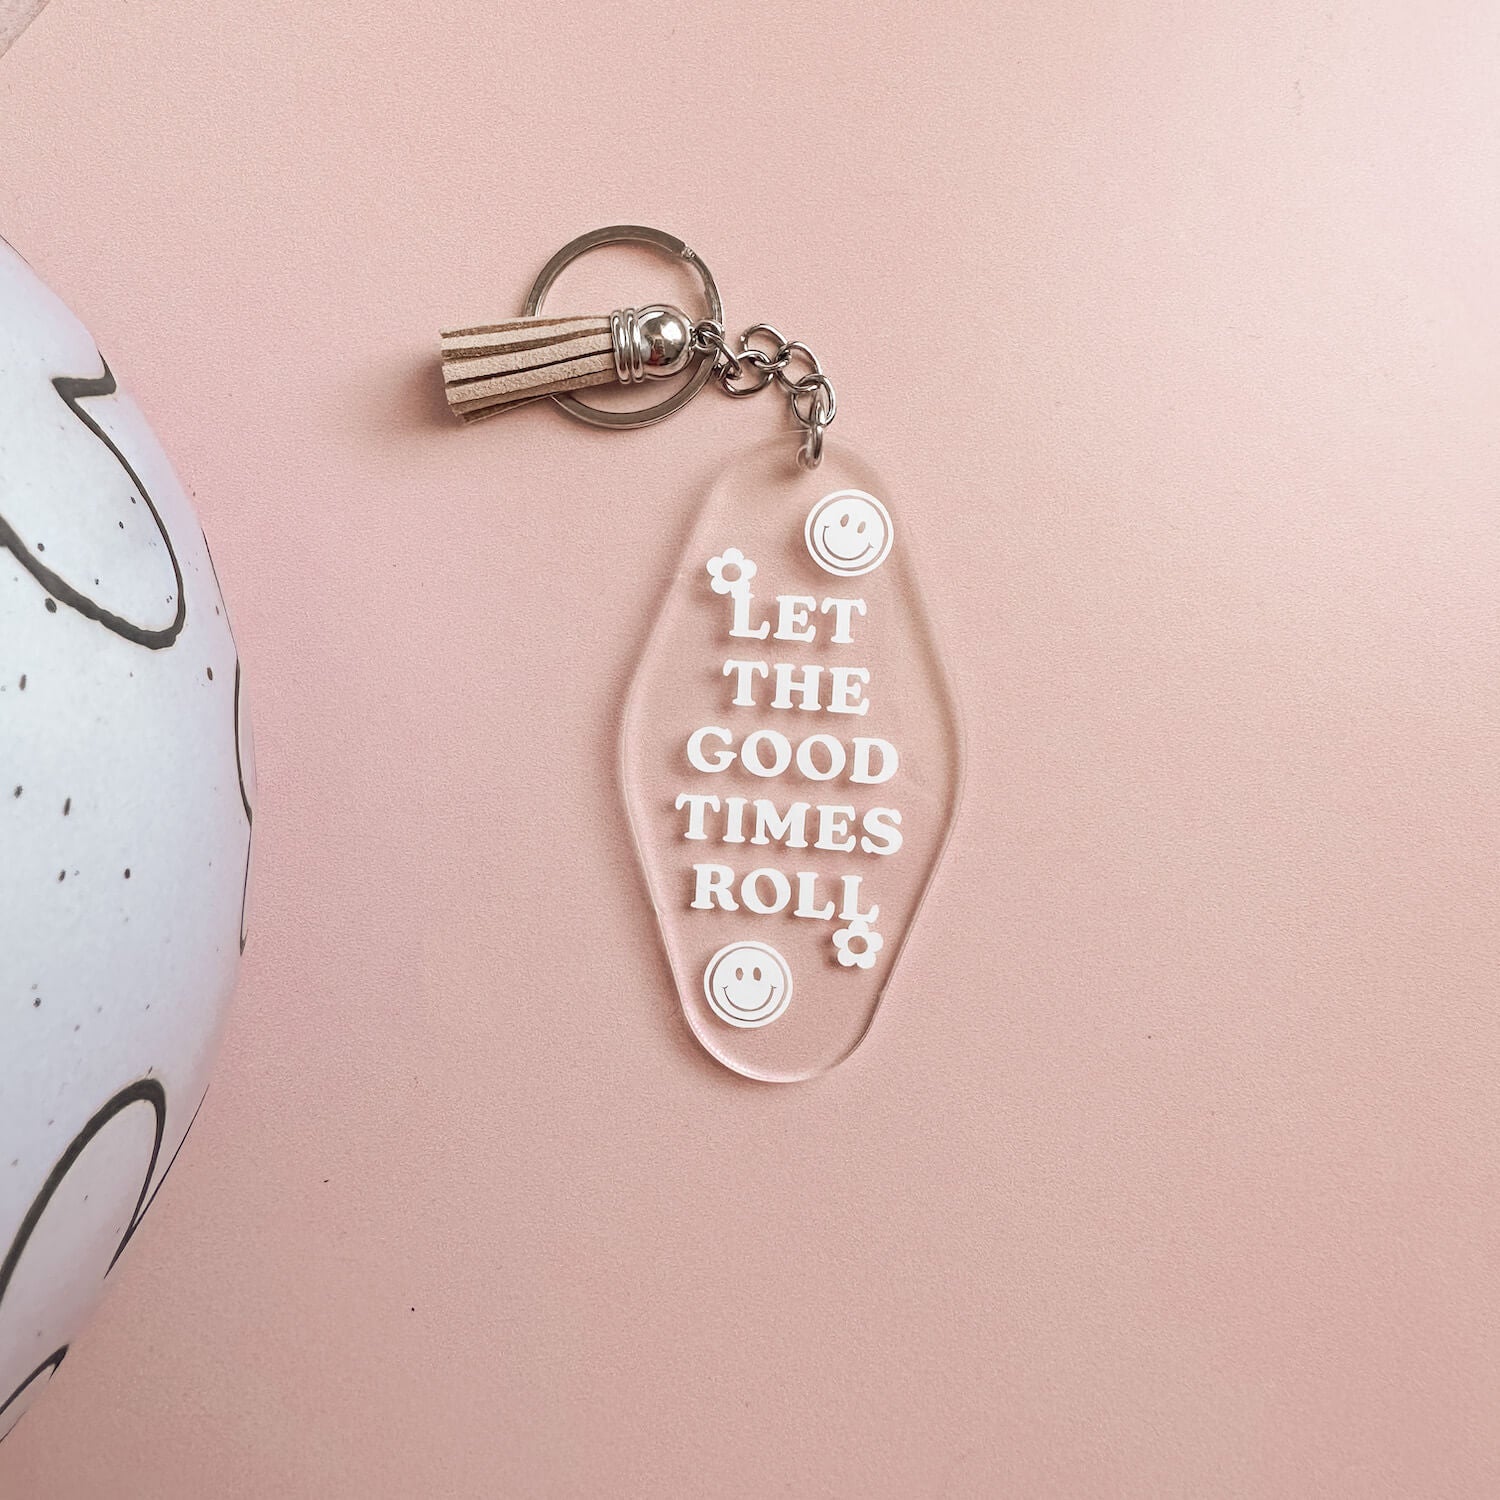 Acrylic keyring with text 'let the good times roll' including brown tassle